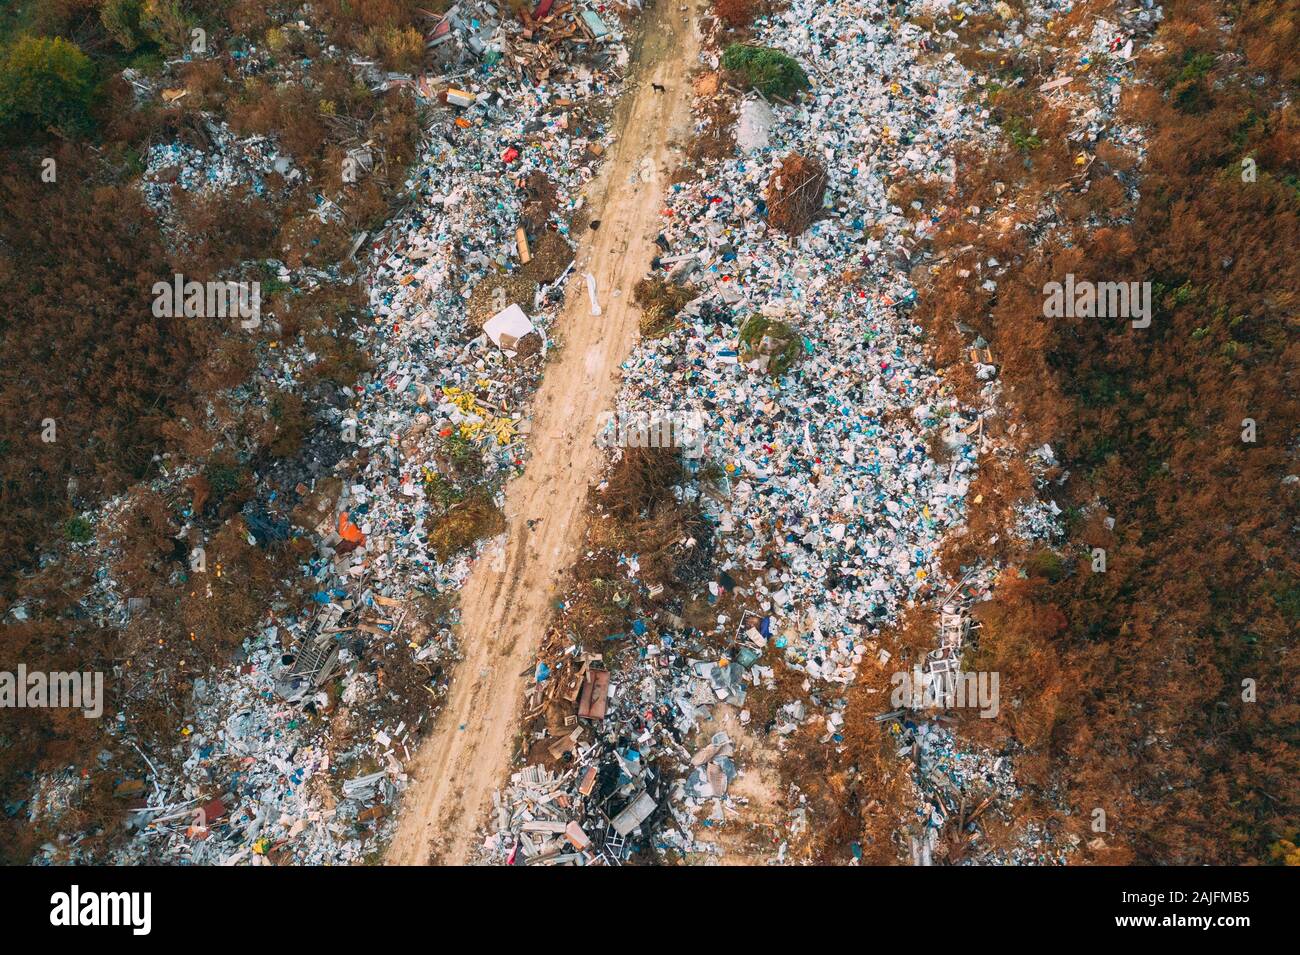 Aerial View Of Domestic Garbage. Bird's-eye View Of Junk. Domestic Waste In Landfill Junkyard. Eco Concept Garbage Disaster From Ecological Pollution Stock Photo